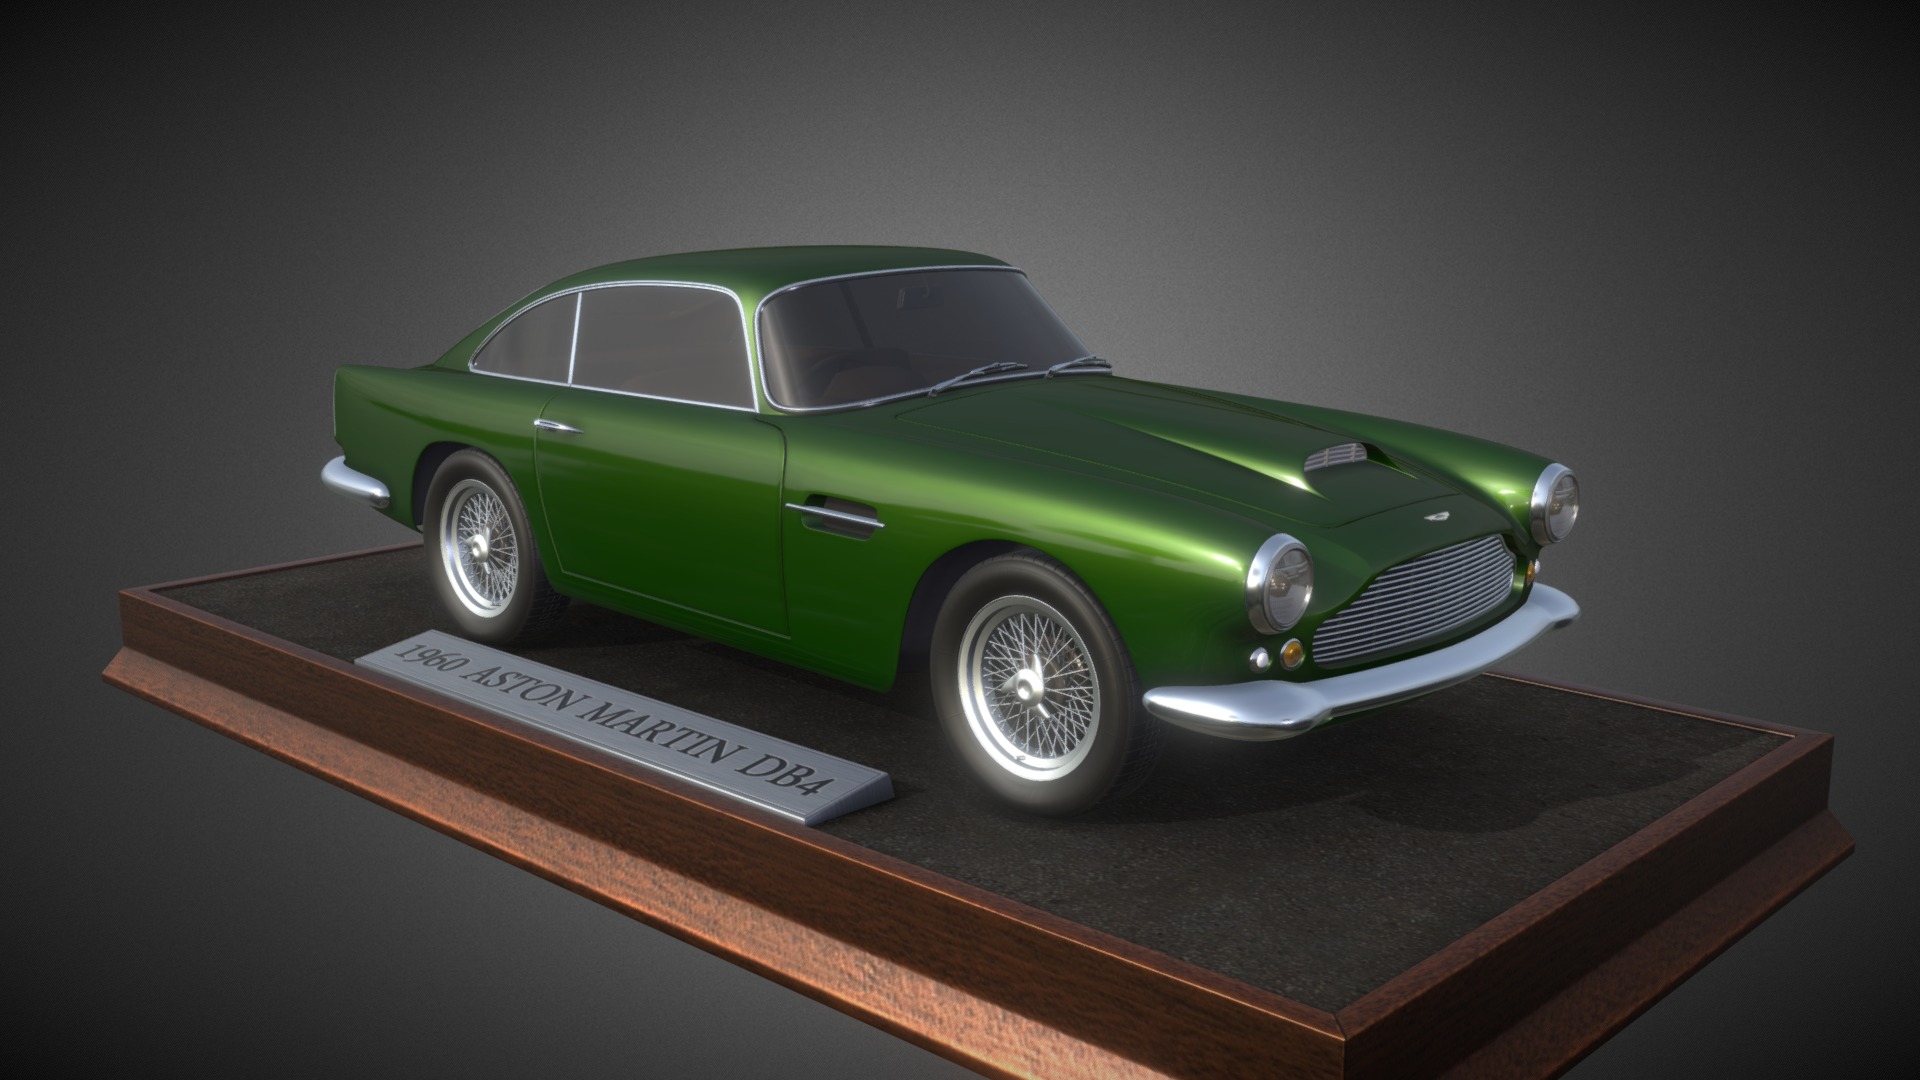 3D model 1960 Aston Martin DB4 - This is a 3D model of the 1960 Aston Martin DB4. The 3D model is about a green car on a wooden surface.